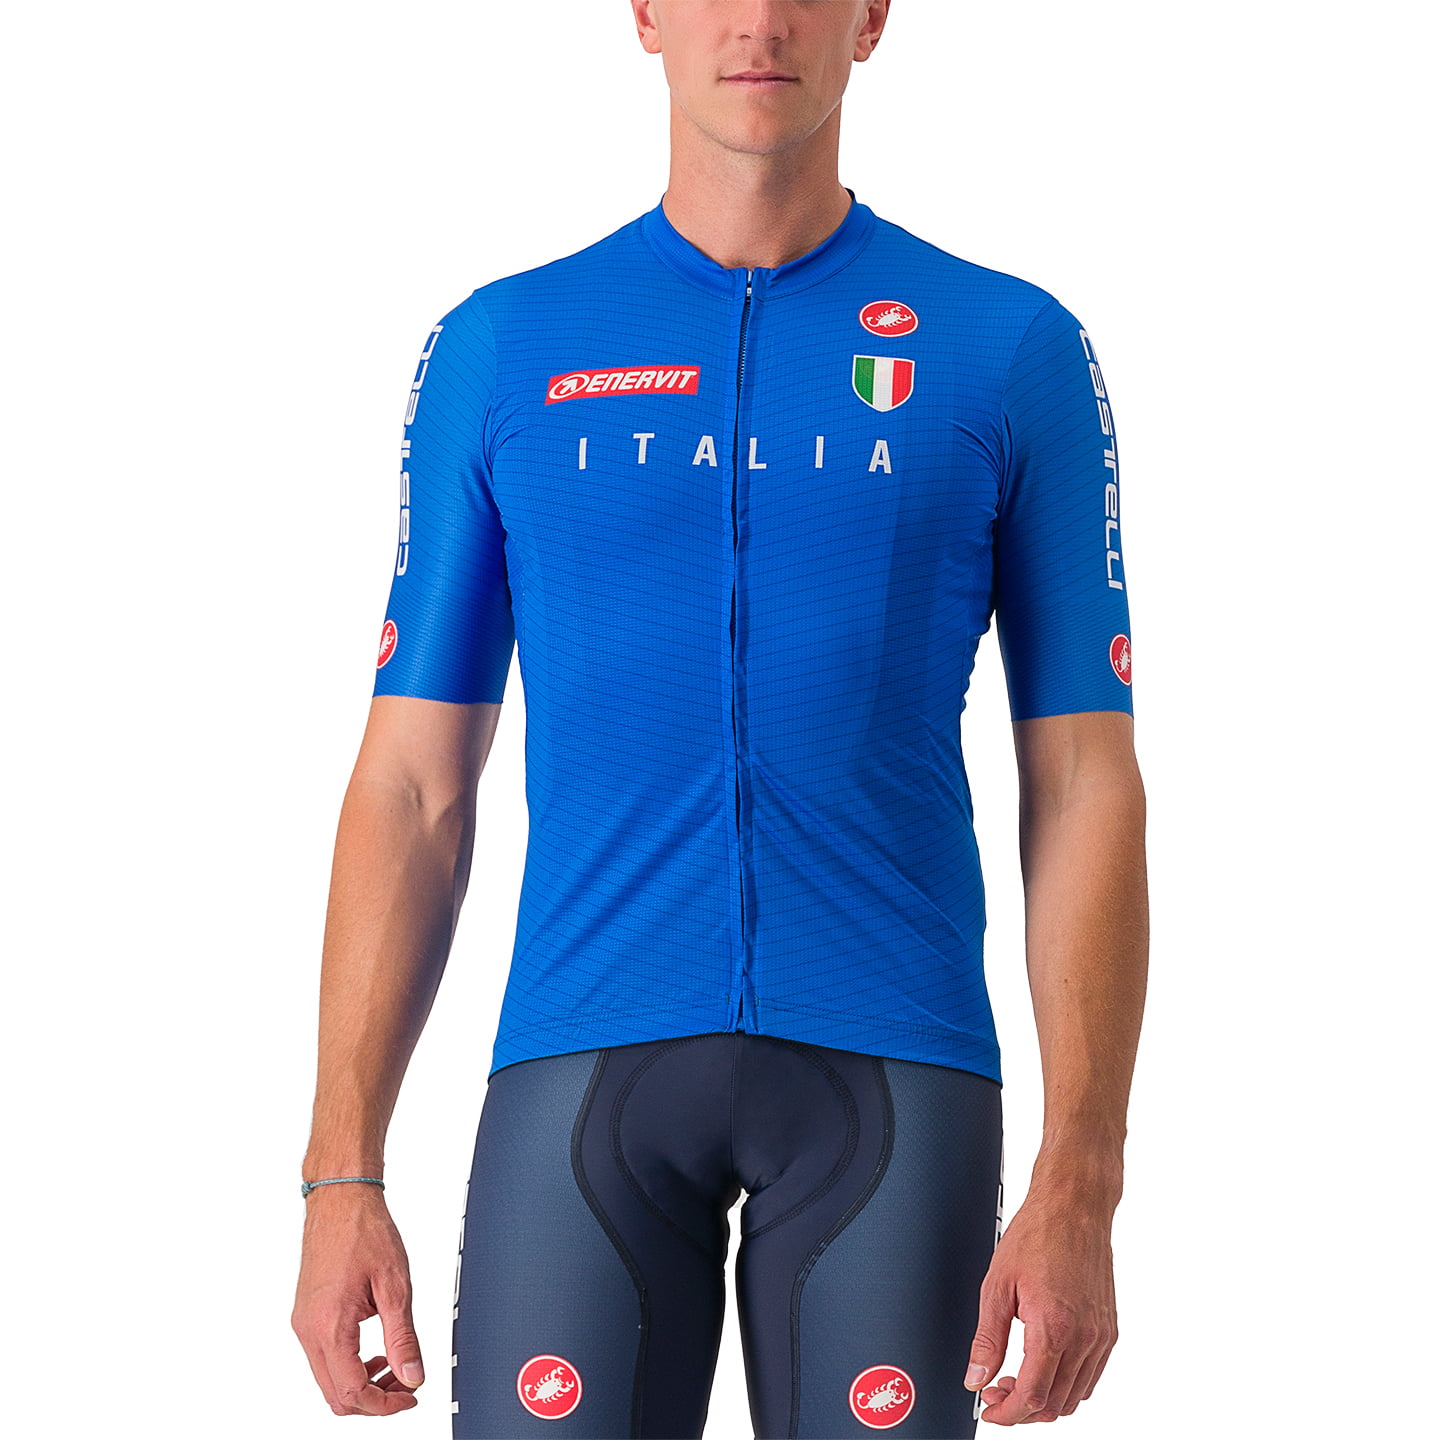 ITALIAN NATIONAL TEAM 2024 Short Sleeve Jersey, for men, size S, Cycling jersey, Cycling clothing